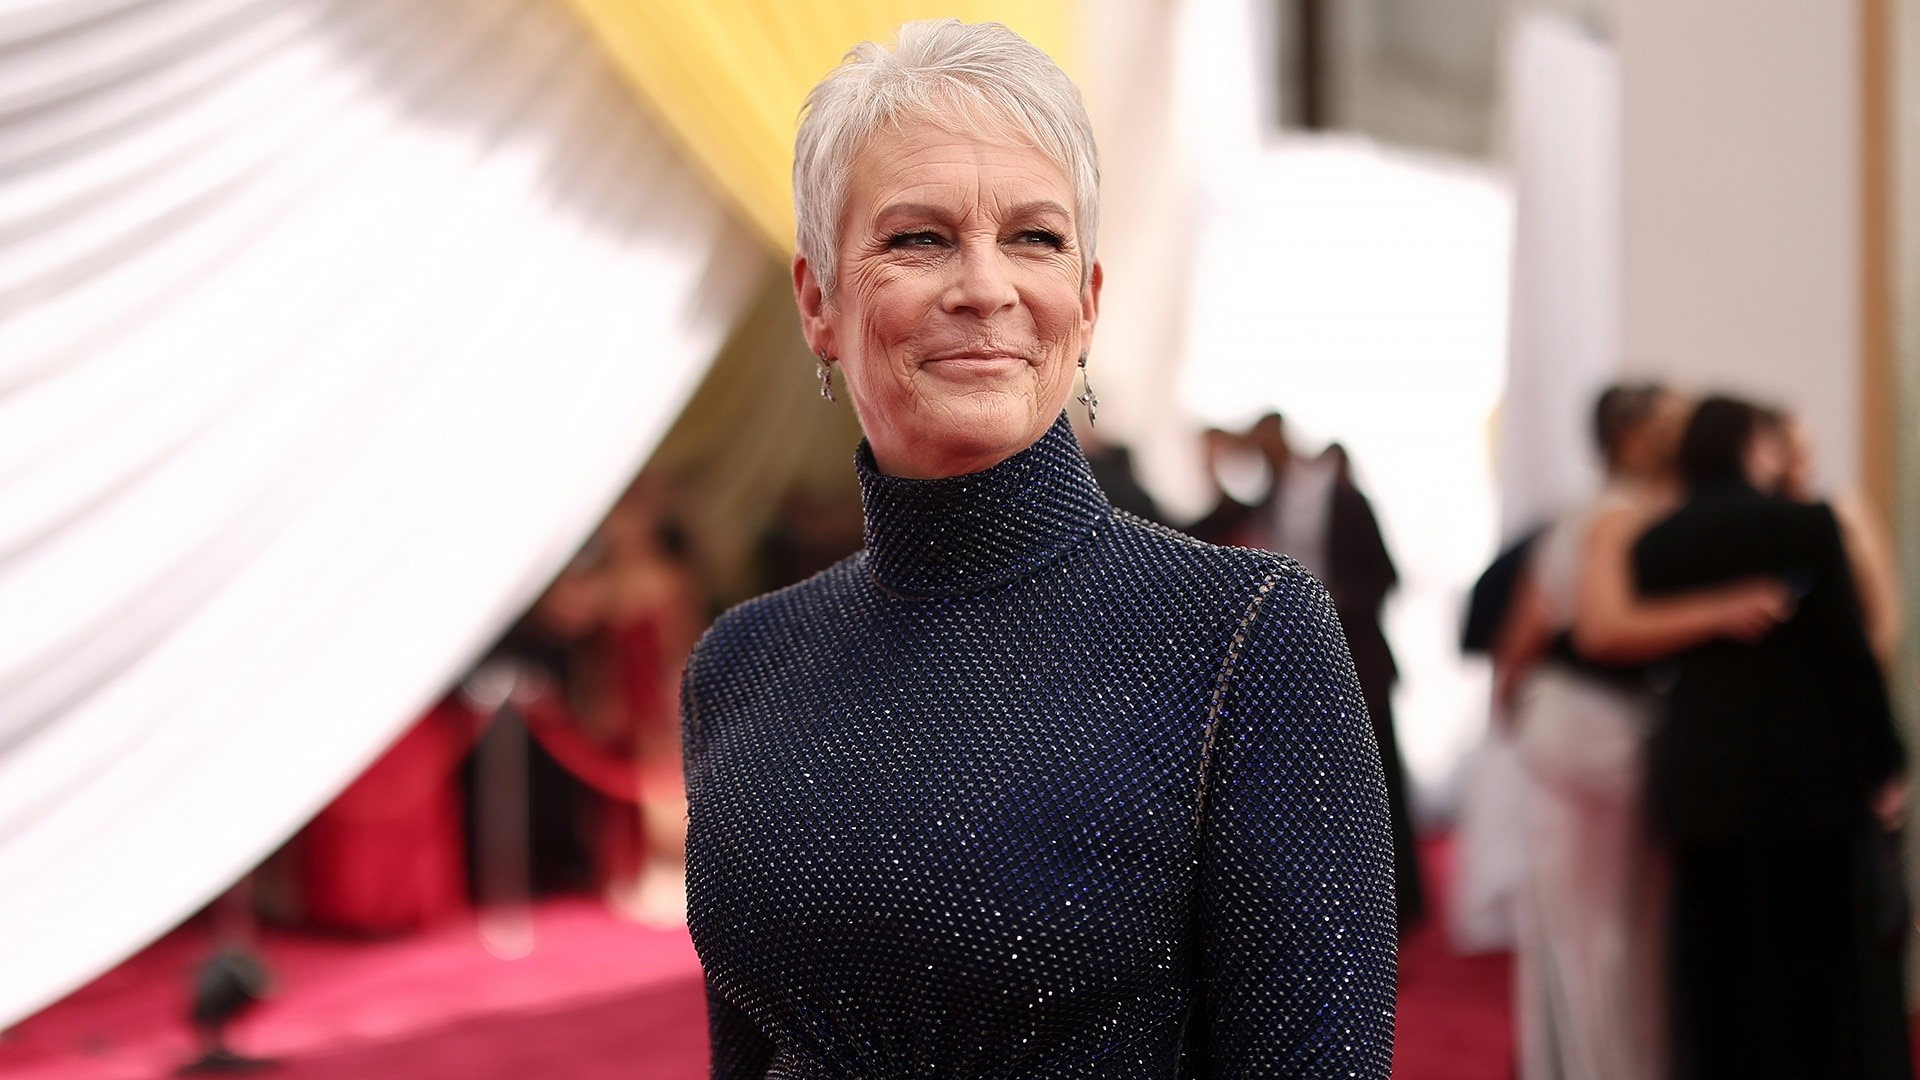 Watch TODAY Excerpt See moment Jamie Lee Curtis learns of Oscar